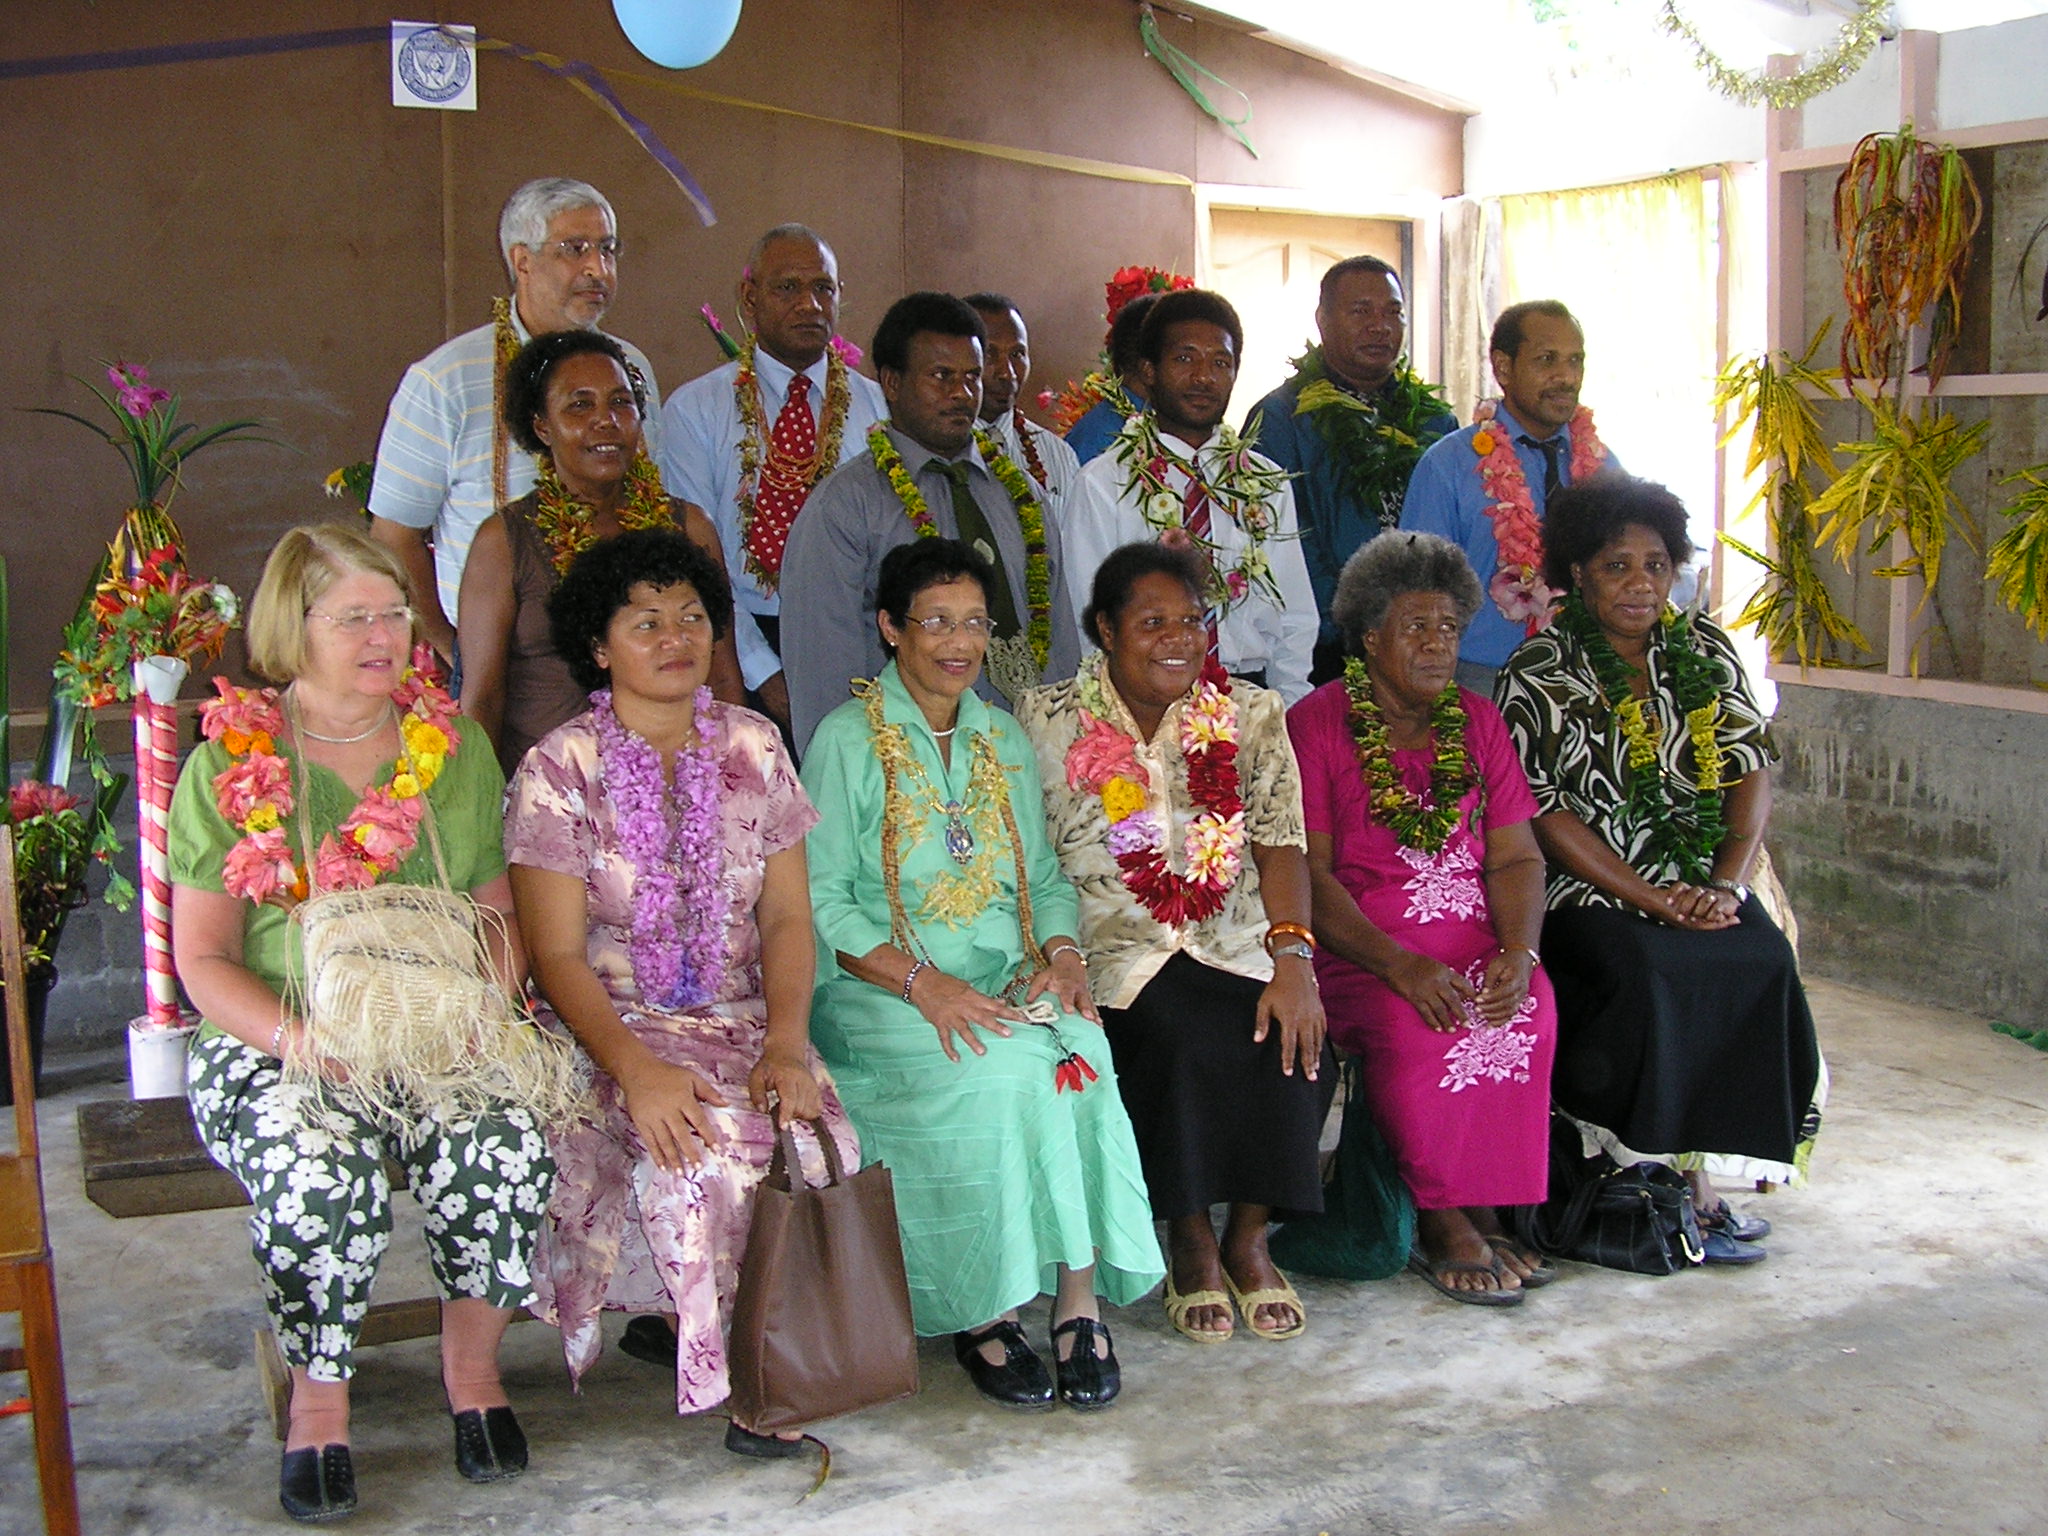 After opening of Women's centre in Kira Kira, Solomon Islands with Elders and Chiefs of the village. Lorna Mead is far right